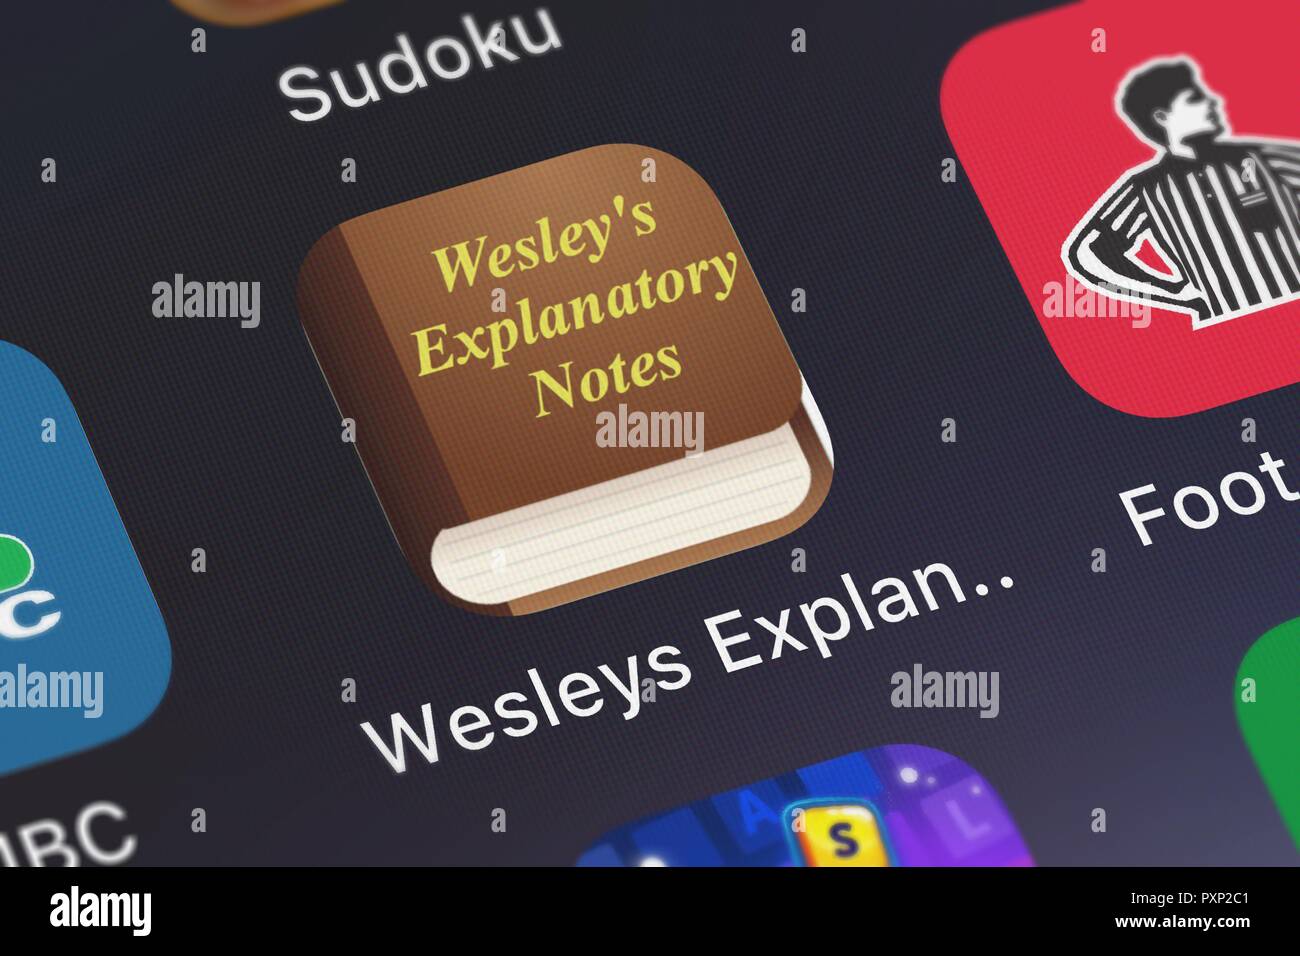 London, United Kingdom - October 23, 2018: The Wesley's Explanatory Notes with KJV Bible Verses mobile app from Oleg Shukalovich on an iPhone screen. Stock Photo